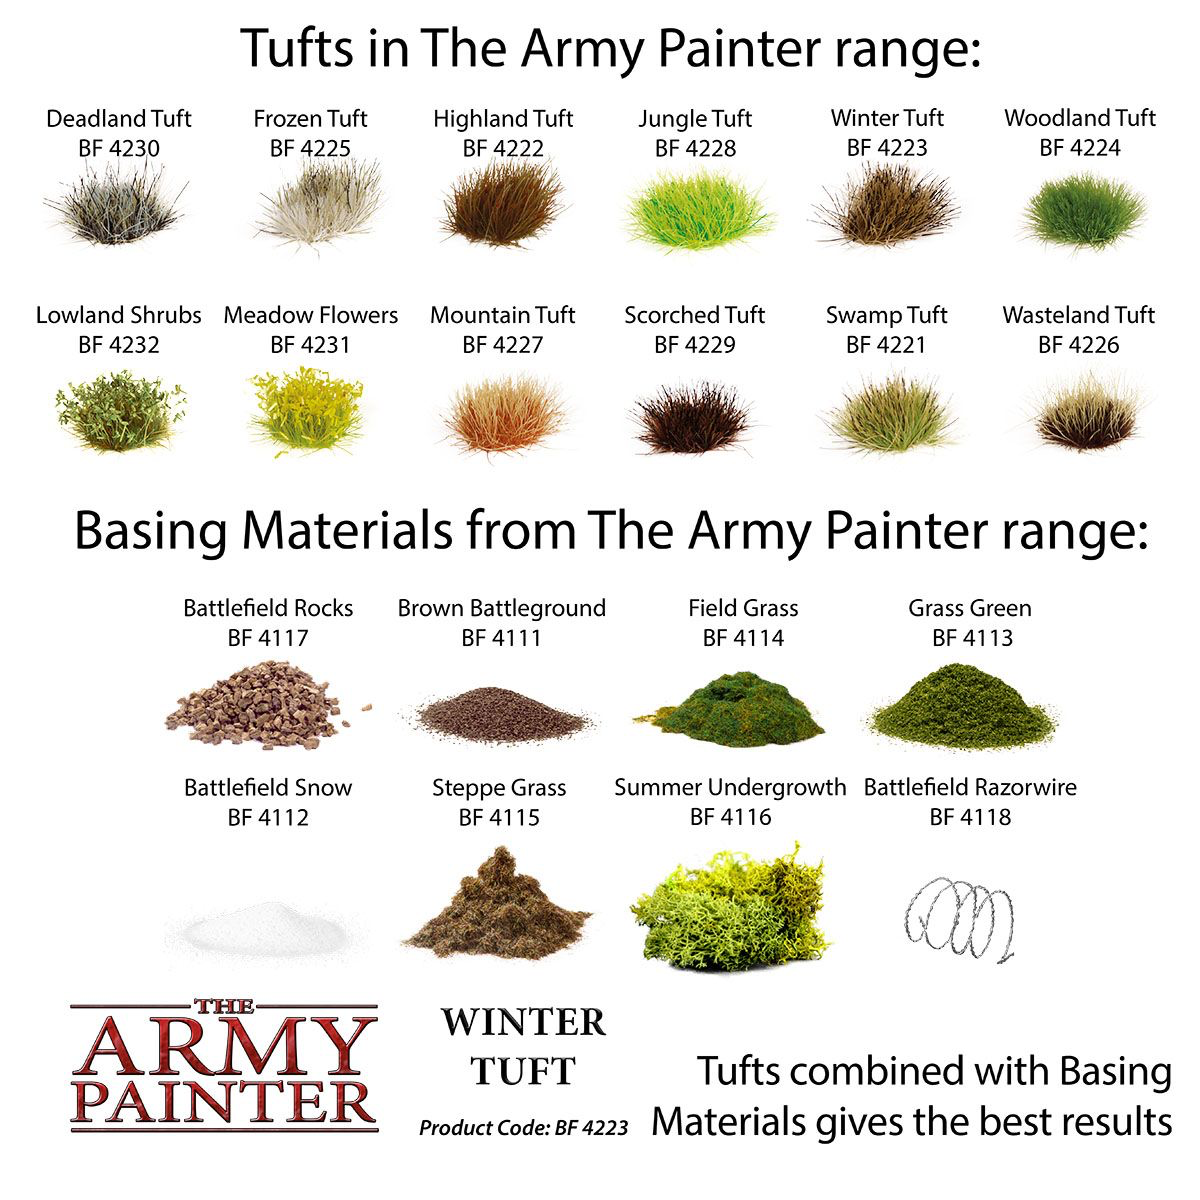 The Army Painter - Winter Tufts